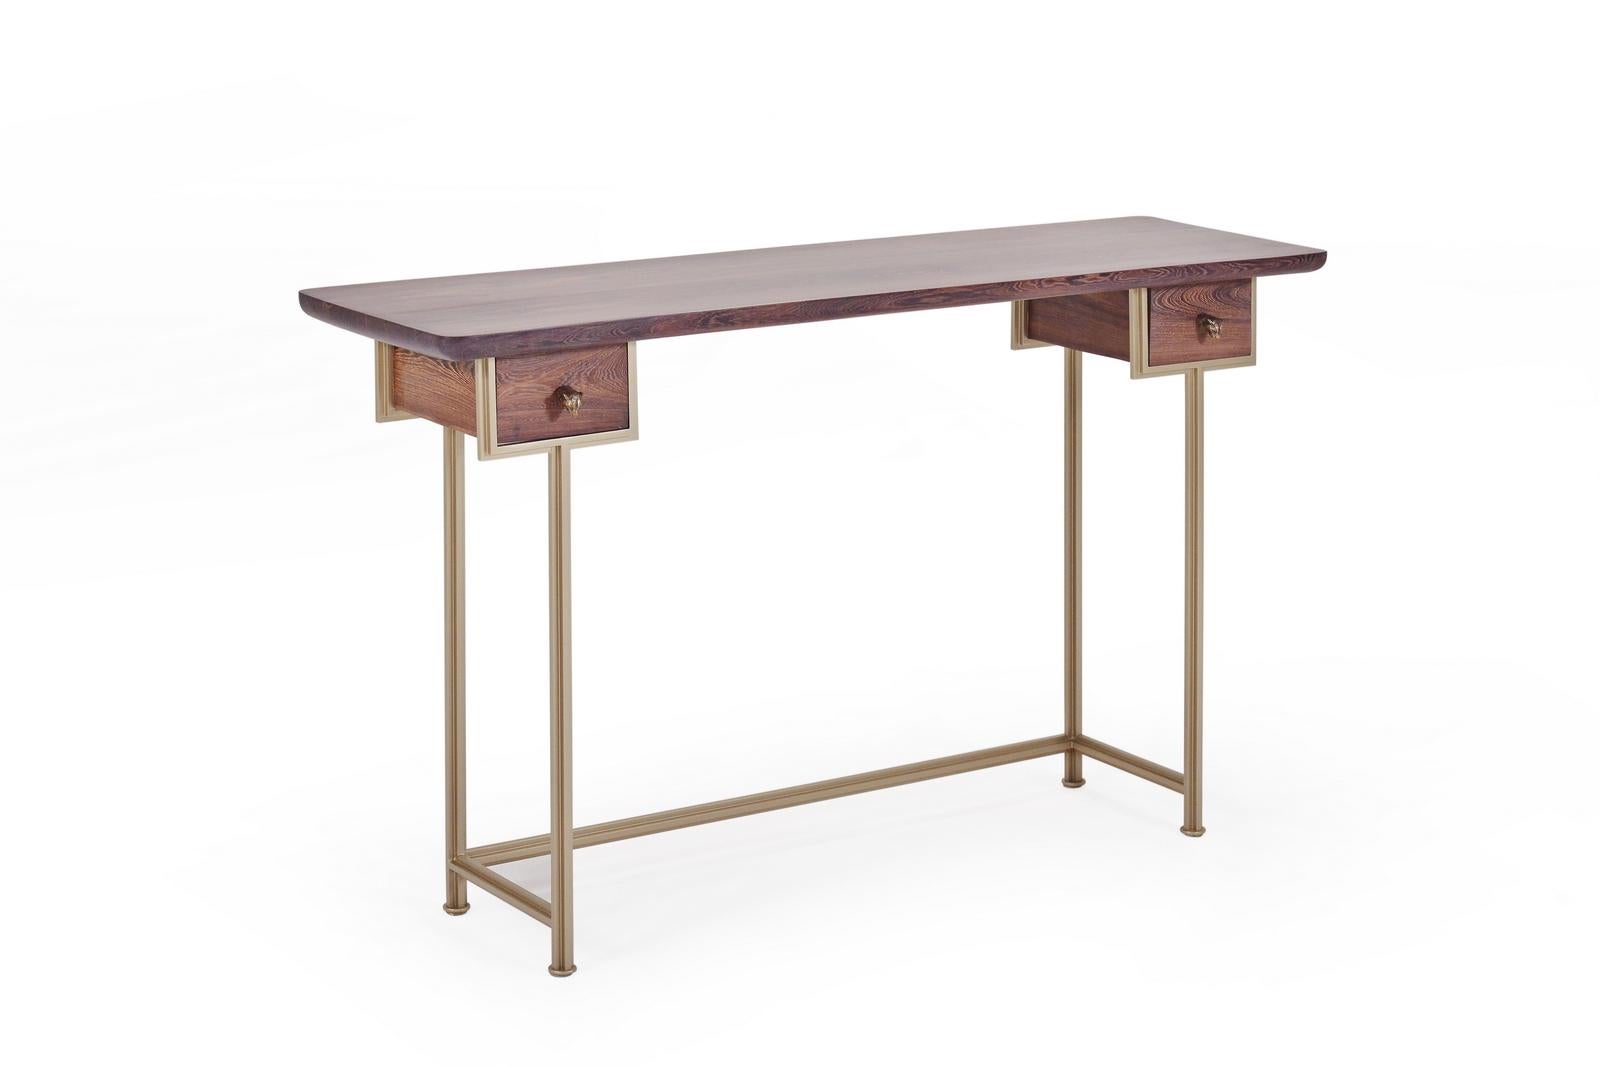 Ming Bespoke Desk, Reclaimed Wood, Extruded Hand Weld Brass Frame, by P. Tendercool For Sale